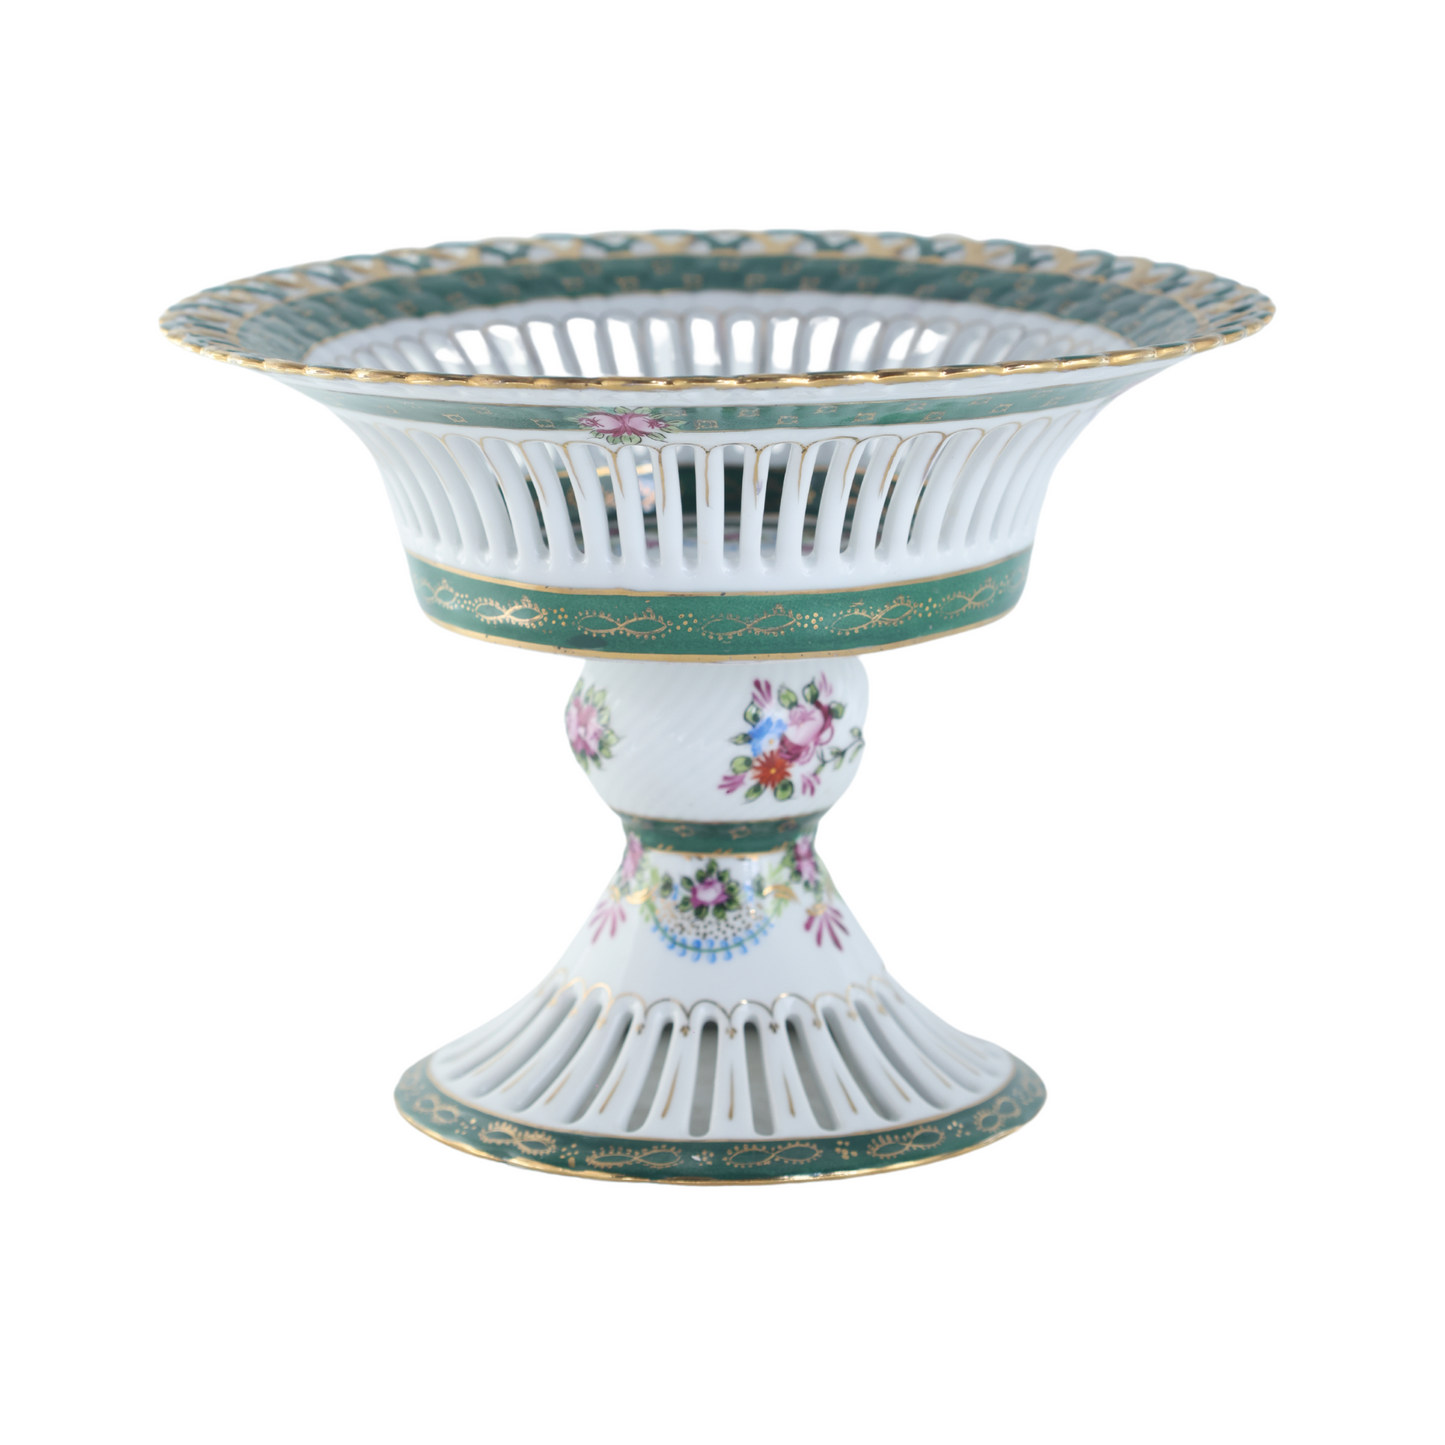 Hand-painted Decorative Fruit Bowl with Flower Motif